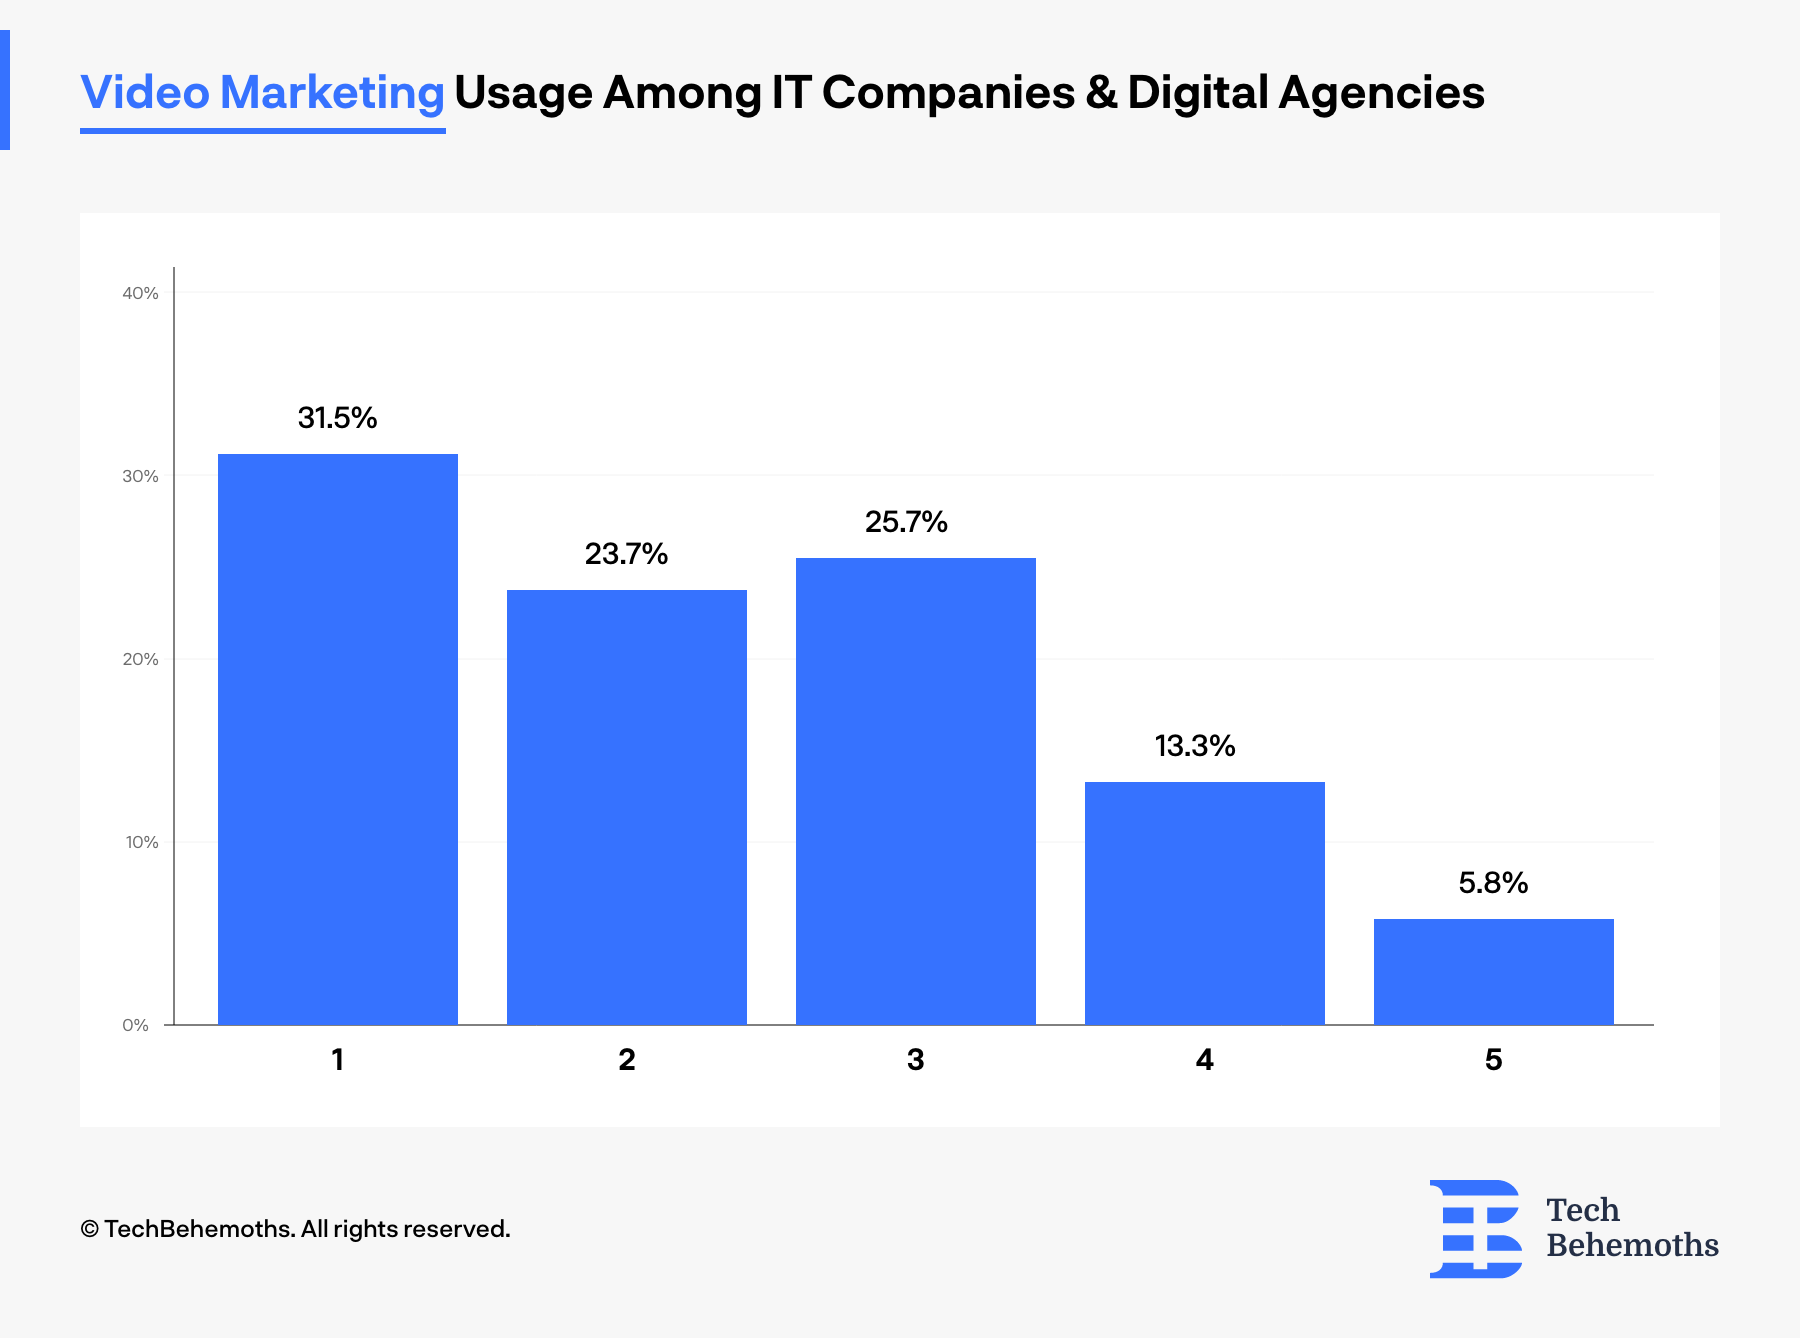 How frequent IT companies and digital agencies use Video marketing for self advertising - survey results